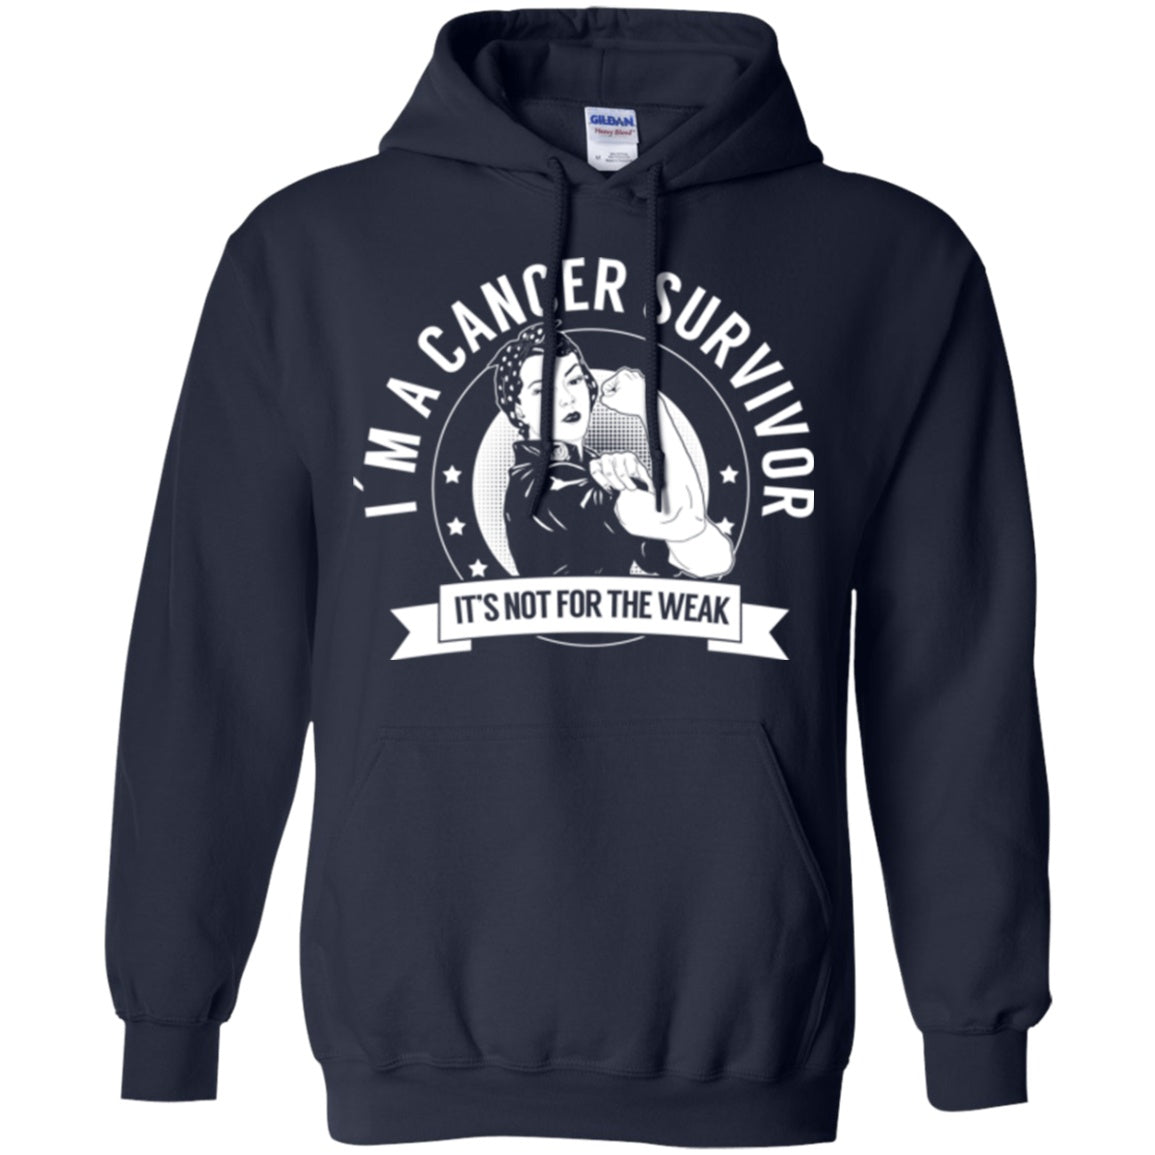 Cancer Survivor Not For The Weak Pullover Hoodie 8 oz. - The Unchargeables